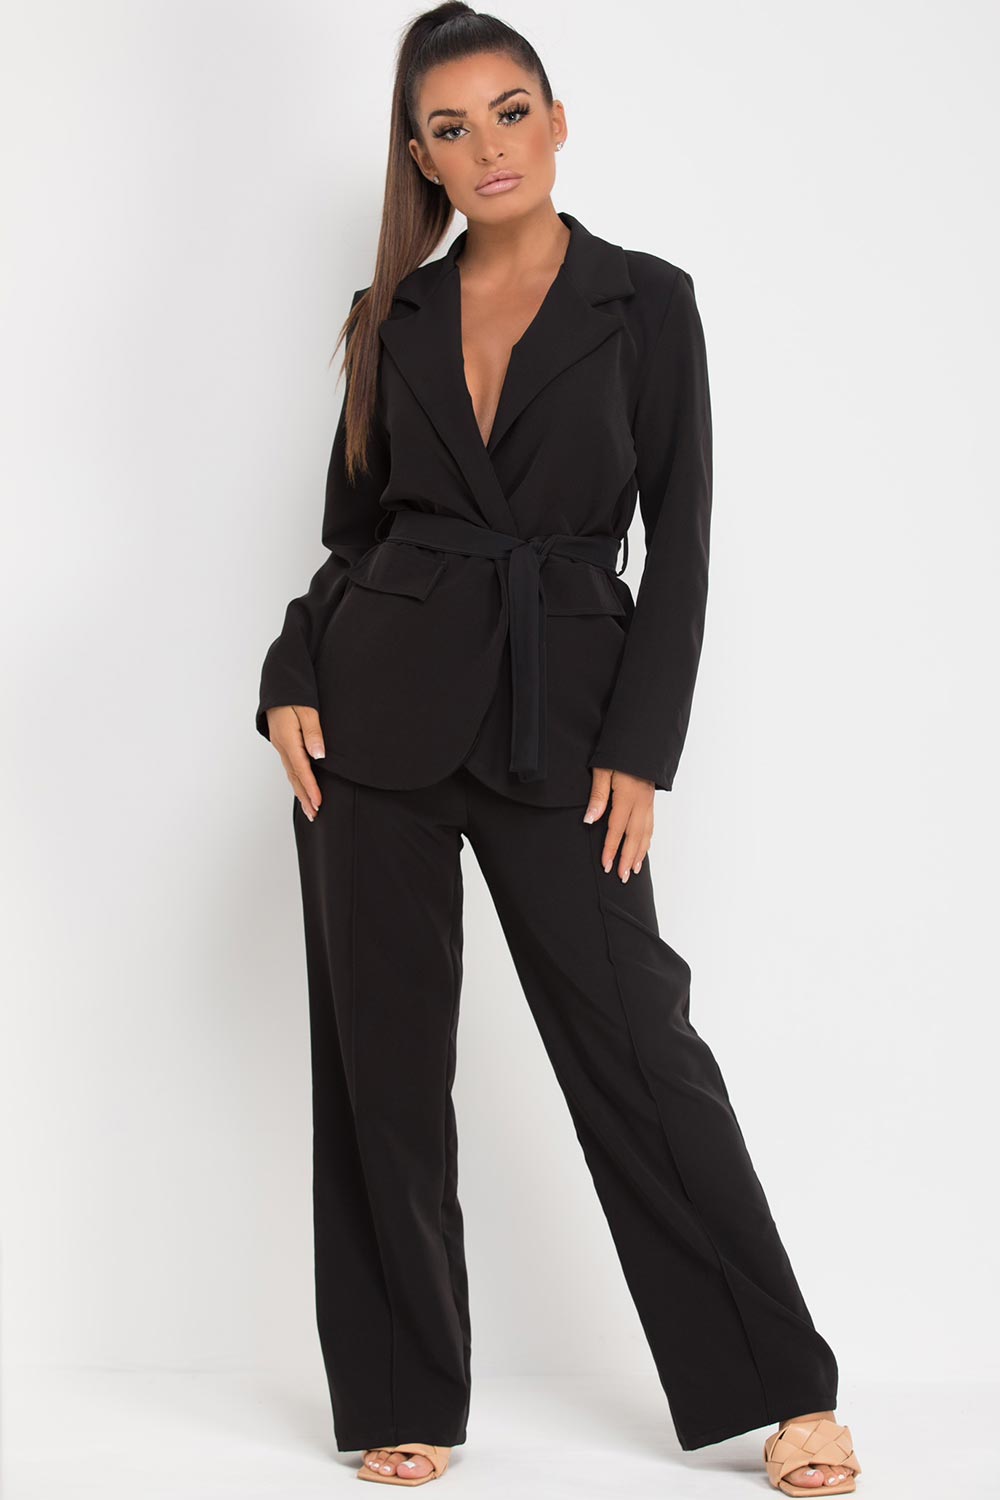 Belted Blazer And Wide Leg Trousers Set Black Two Piece Co-Ord –